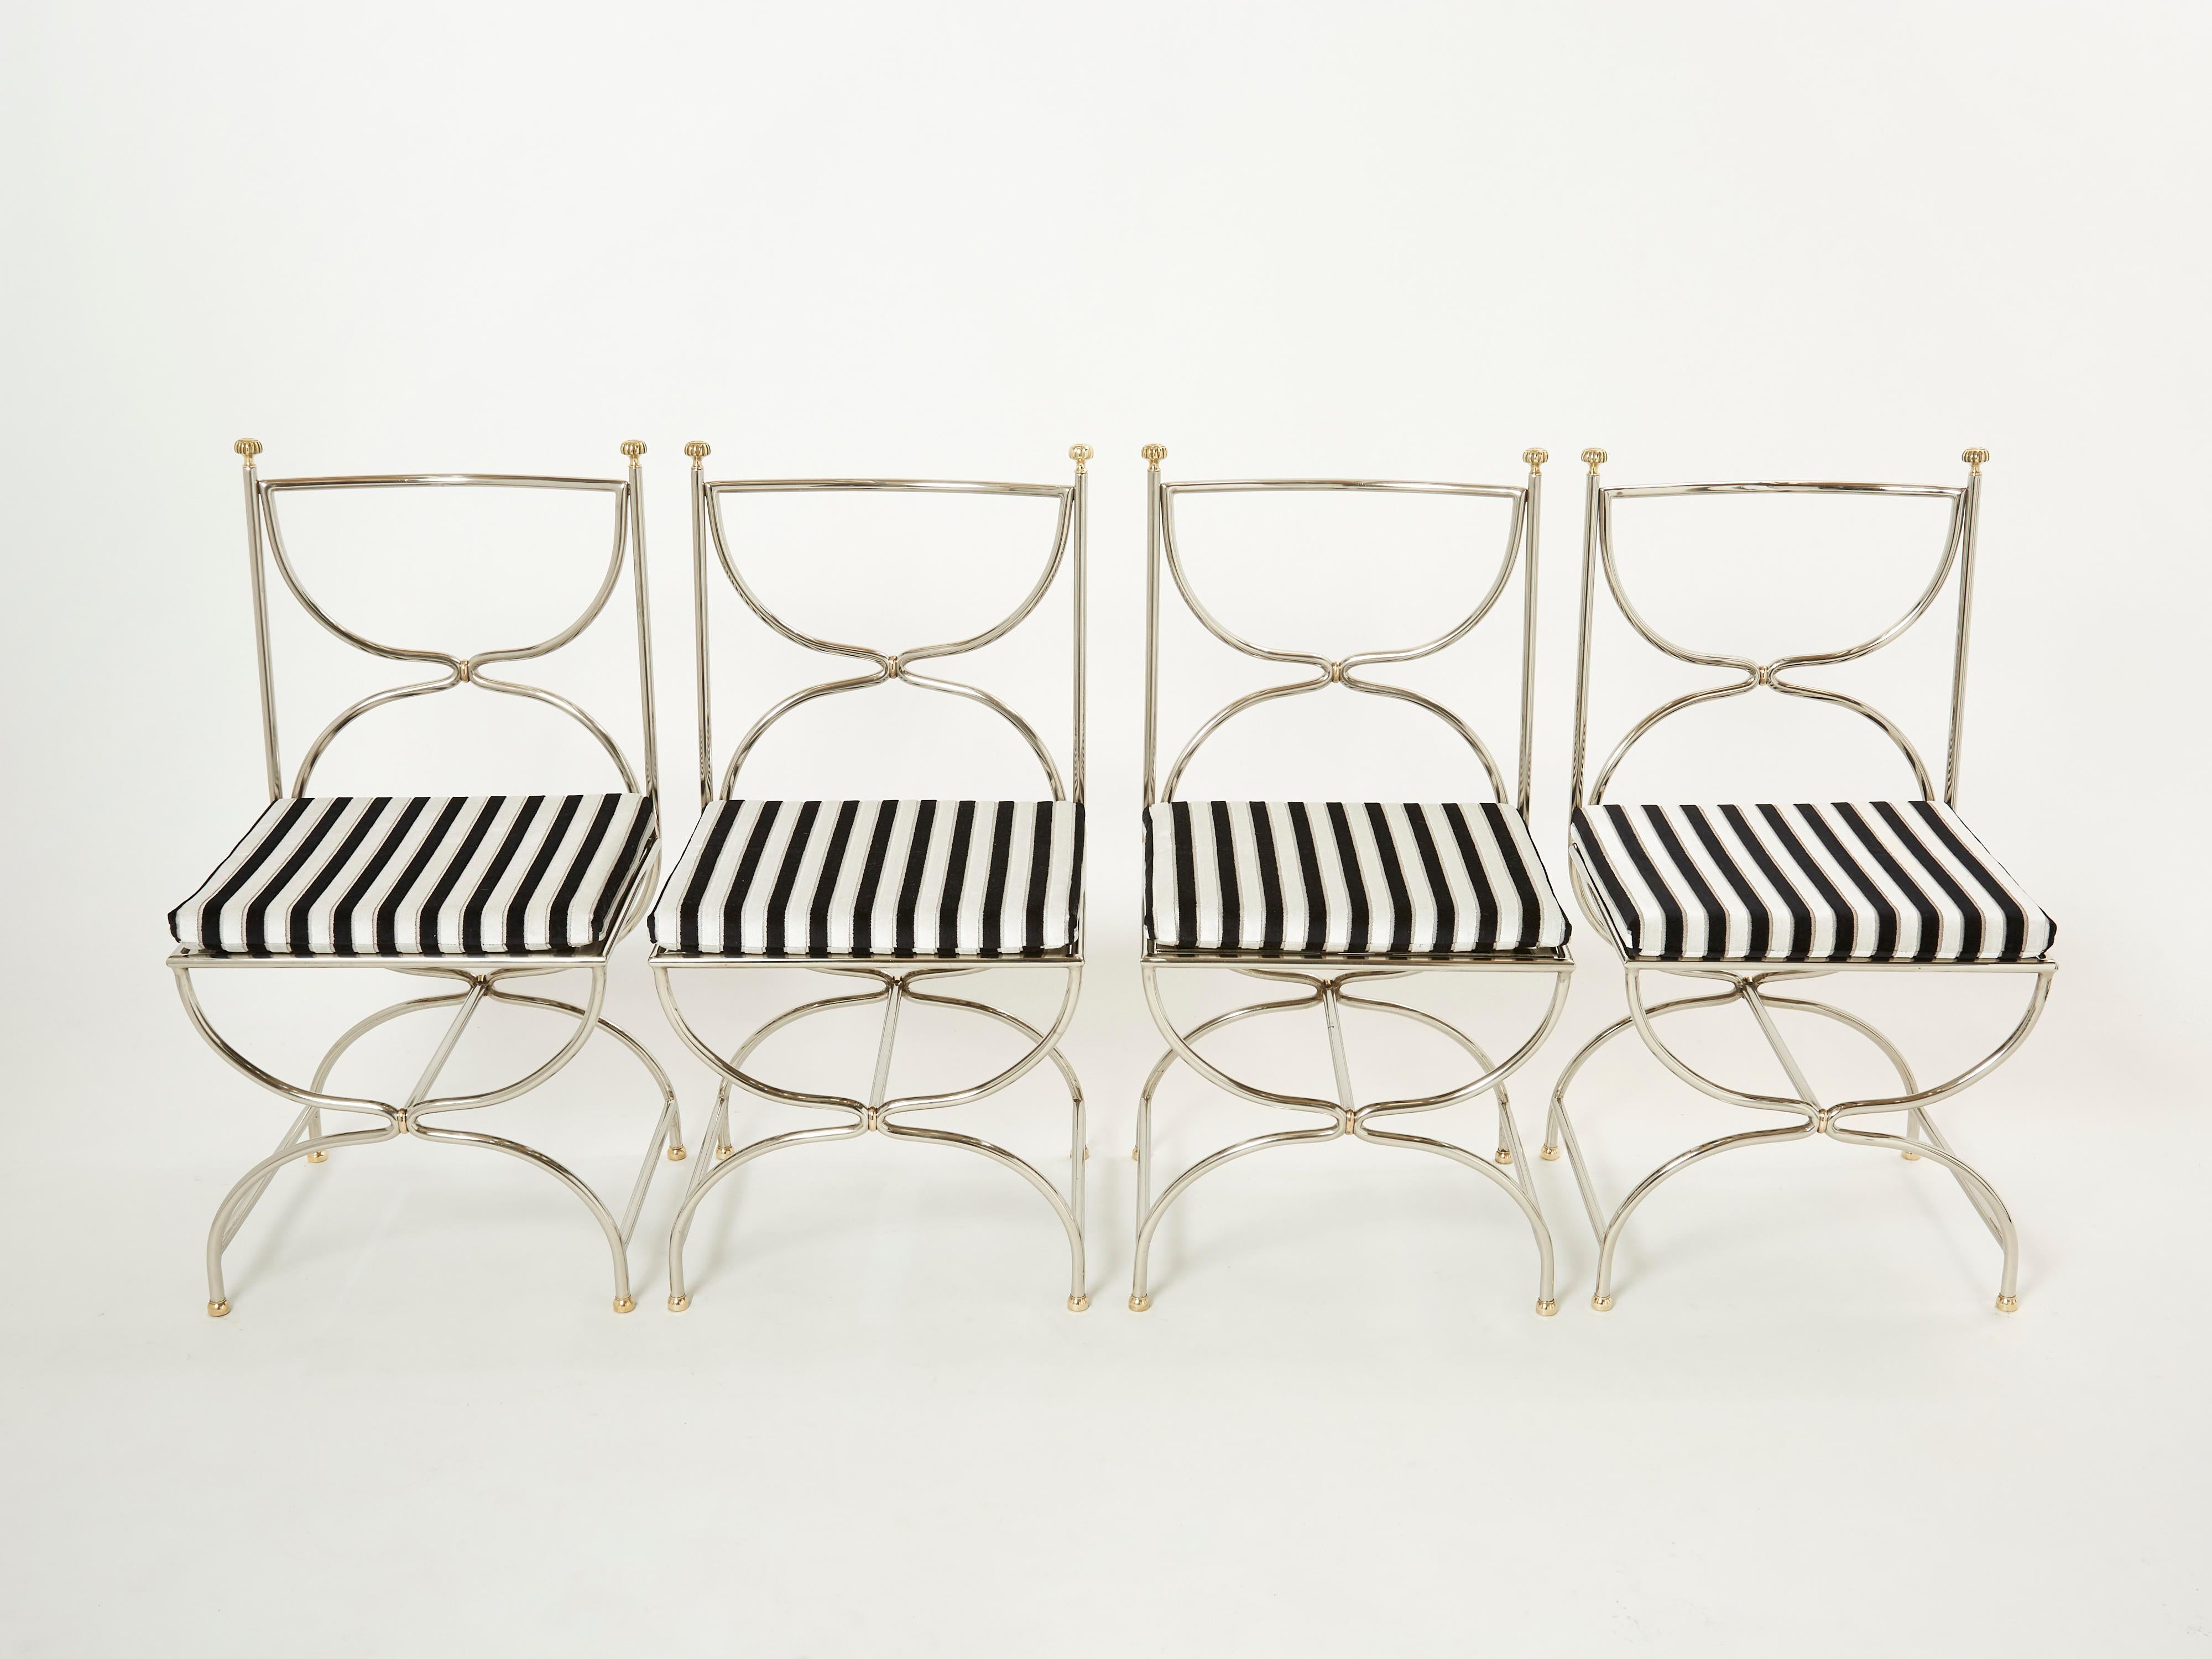 Beautiful set of 1960’s Curule Savonarola chairs made of heavy stainless steel metal with brass accents. This incredible set of twelve chairs was created by French interior design firm Maison Jansen. The sparse original structure feels like a piece